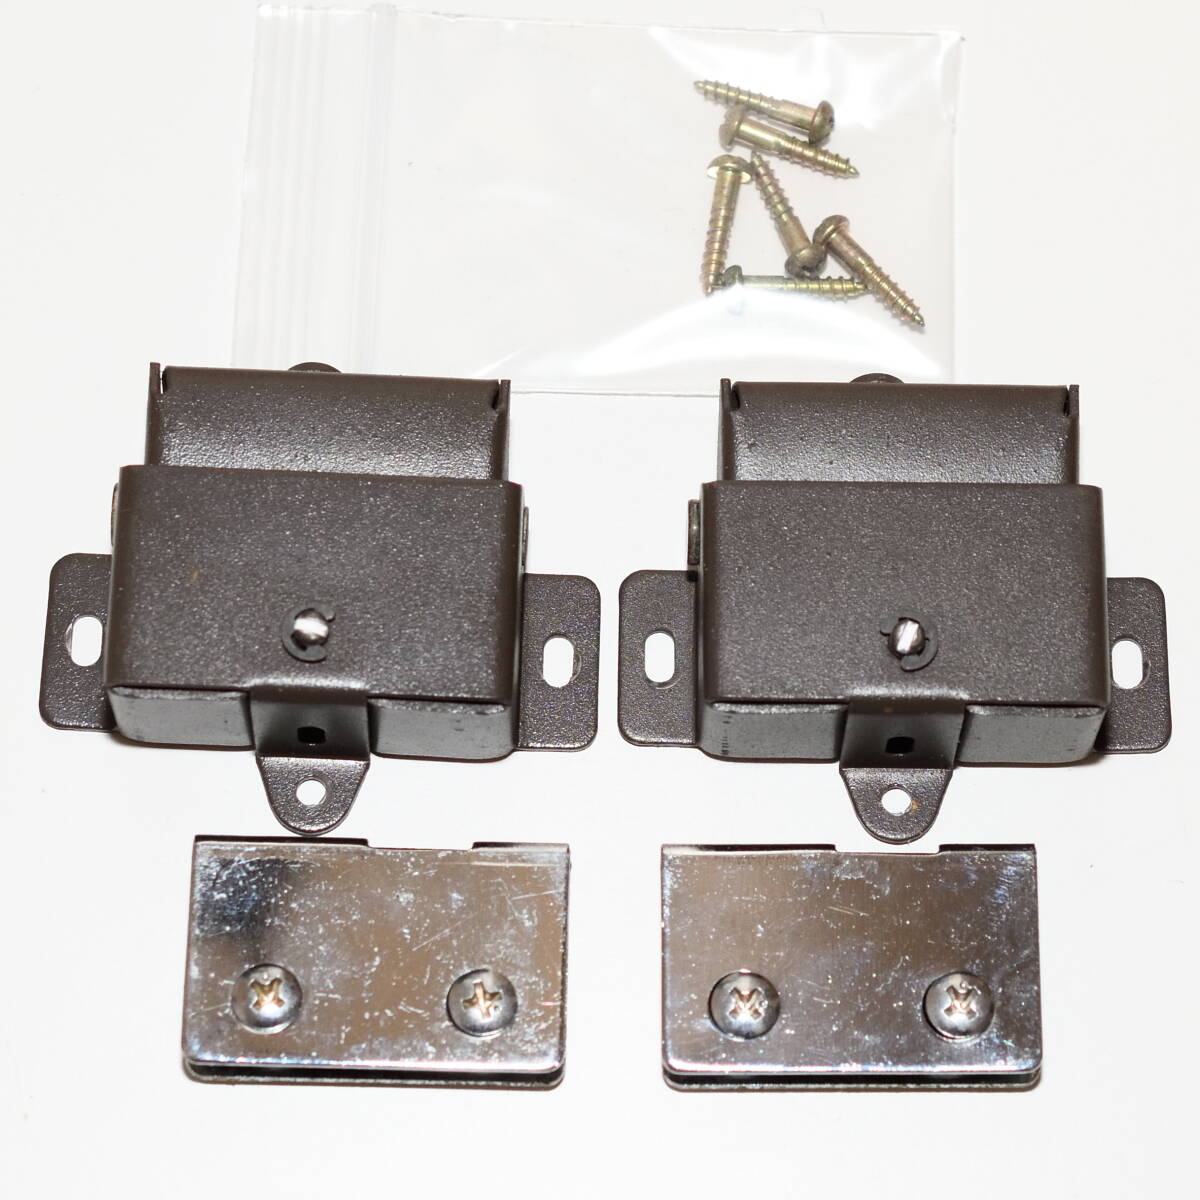 MICRO MR-611 dust cover hinge complete set / micro 